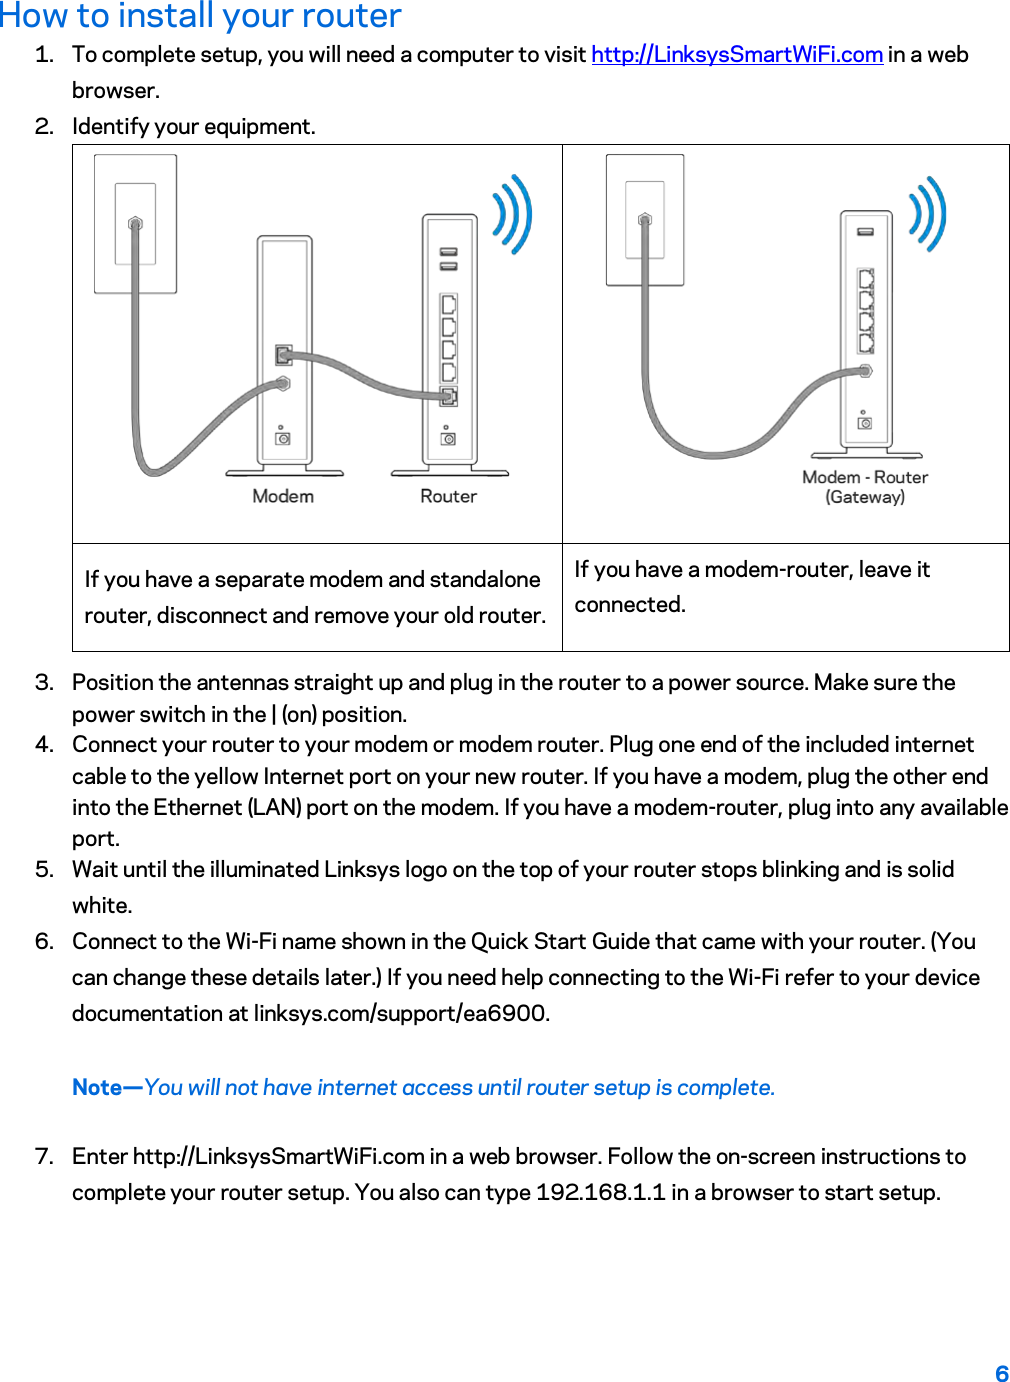 6  How to install your router 1. To complete setup, you will need a computer to visit http://LinksysSmartWiFi.com in a web browser. 2. Identify your equipment.   If you have a separate modem and standalone router, disconnect and remove your old router. If you have a modem-router, leave it connected. 3. Position the antennas straight up and plug in the router to a power source. Make sure the power switch in the | (on) position. 4. Connect your router to your modem or modem router. Plug one end of the included internet cable to the yellow Internet port on your new router. If you have a modem, plug the other end into the Ethernet (LAN) port on the modem. If you have a modem-router, plug into any available port. 5. Wait until the illuminated Linksys logo on the top of your router stops blinking and is solid white.  6. Connect to the Wi-Fi name shown in the Quick Start Guide that came with your router. (You can change these details later.) If you need help connecting to the Wi-Fi refer to your device documentation at linksys.com/support/ea6900. Note—You will not have internet access until router setup is complete. 7. Enter http://LinksysSmartWiFi.com in a web browser. Follow the on-screen instructions to complete your router setup. You also can type 192.168.1.1 in a browser to start setup. 